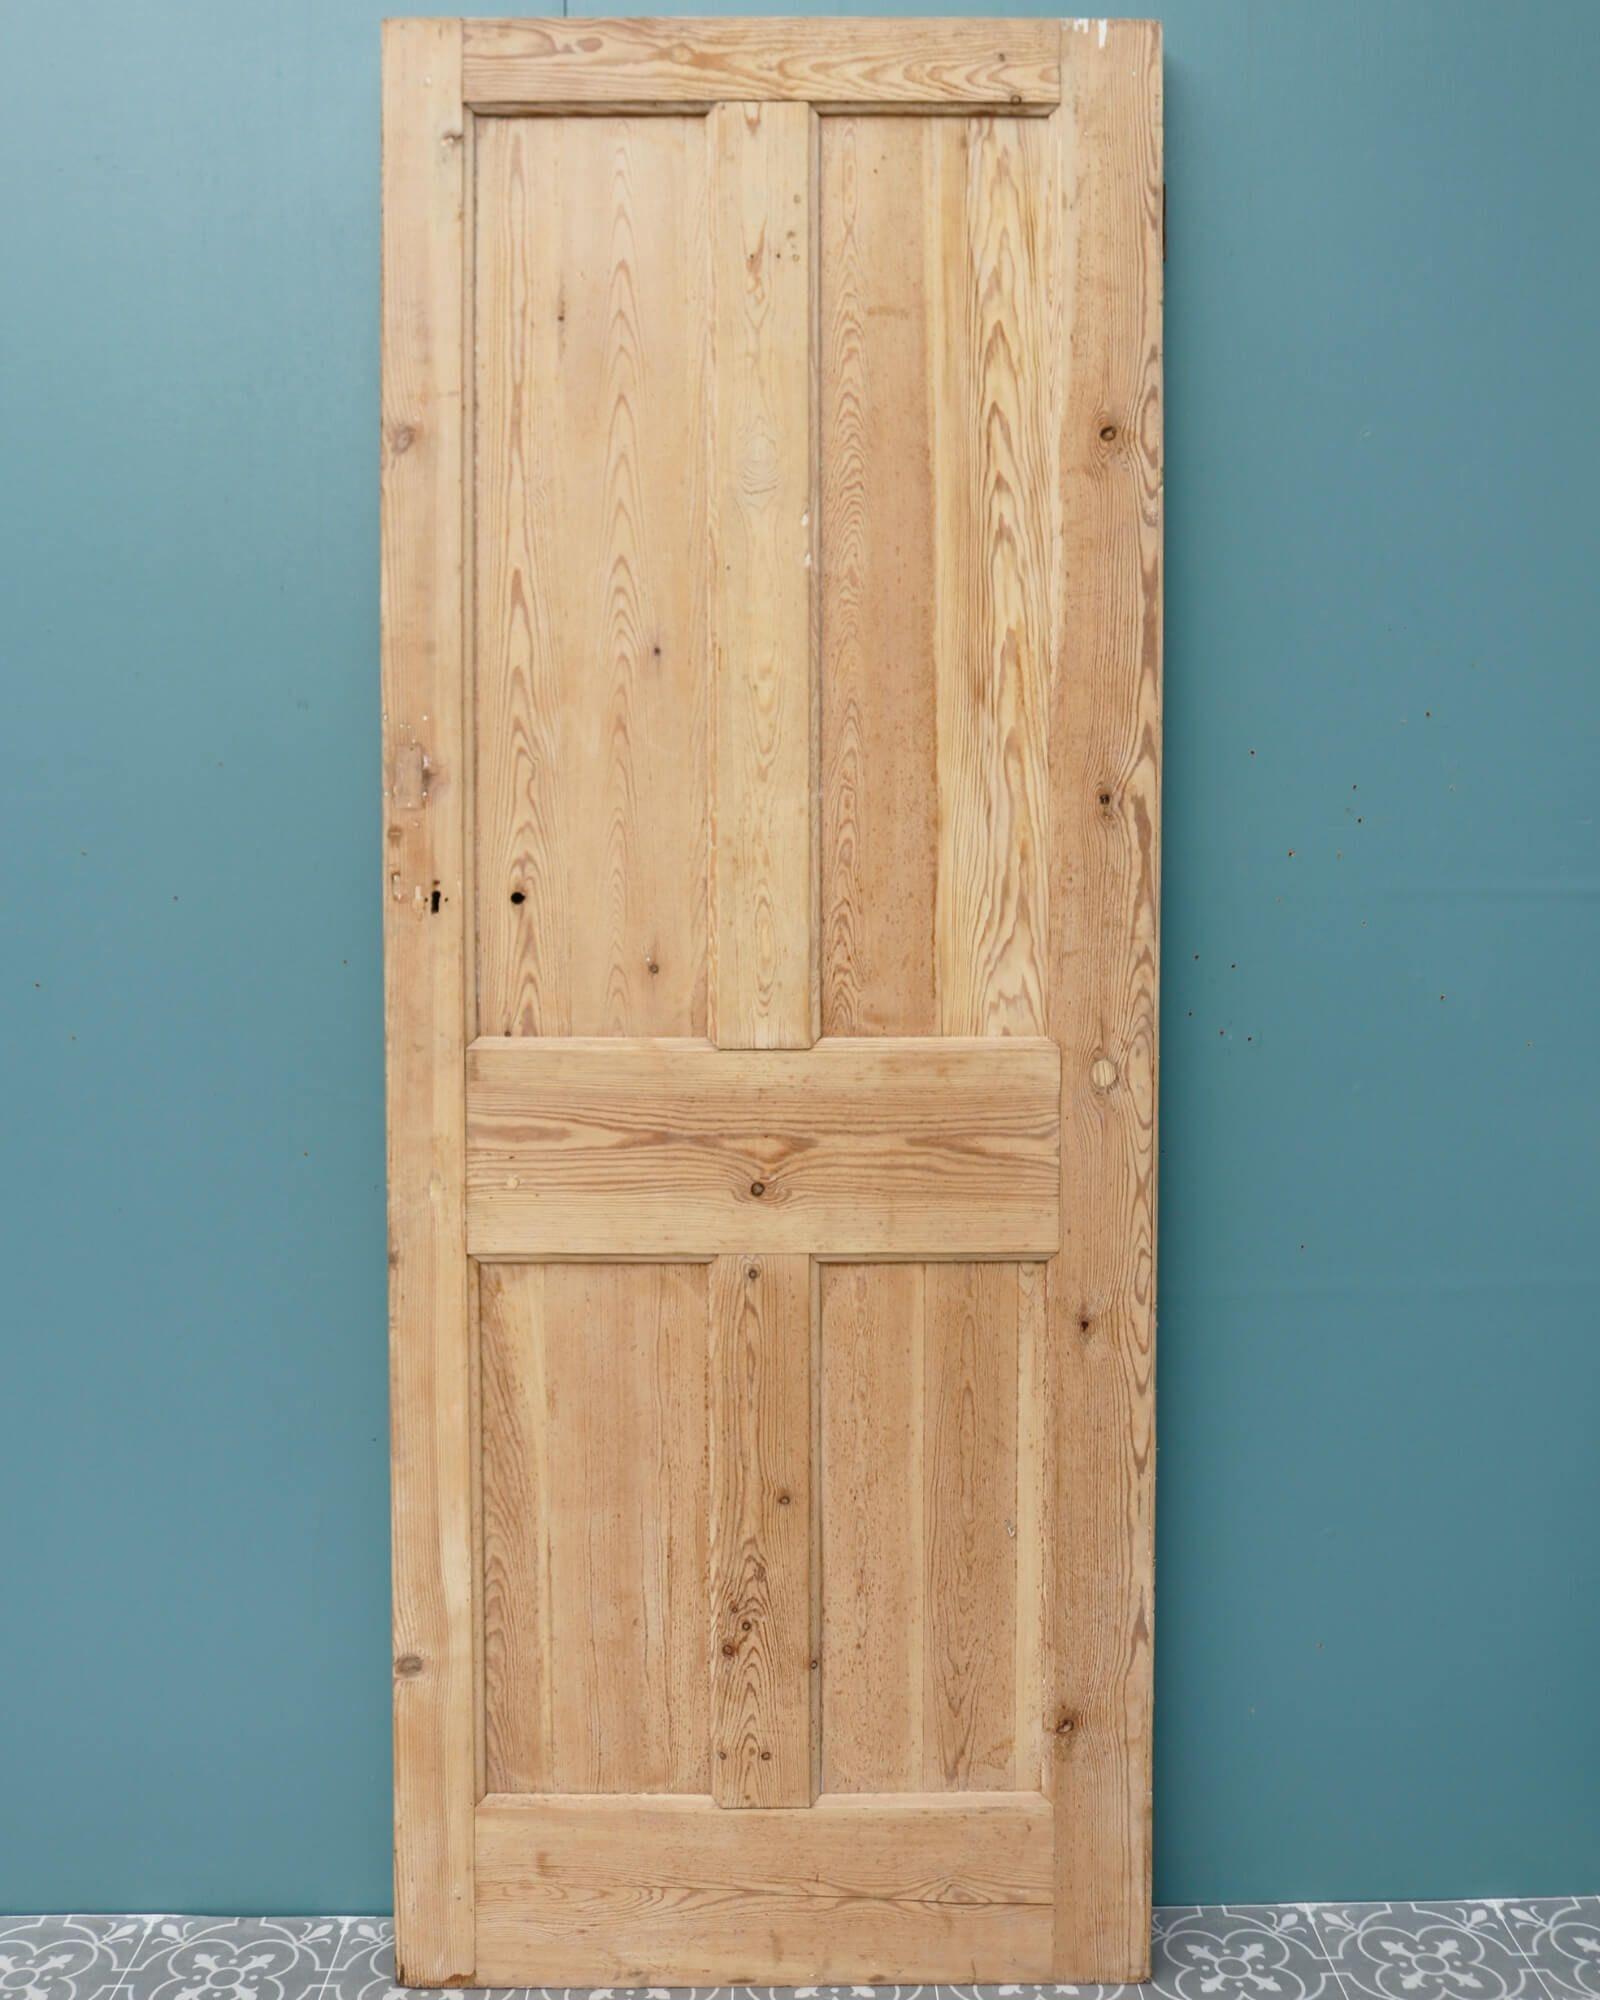 A smart reclaimed 2-panel Georgian style internal door dating from the 1890s. This antique door has an unusual design with 2 raised and fielded panels to the front while the back is a standard 4 panels. Made in pine, this internal door is stripped